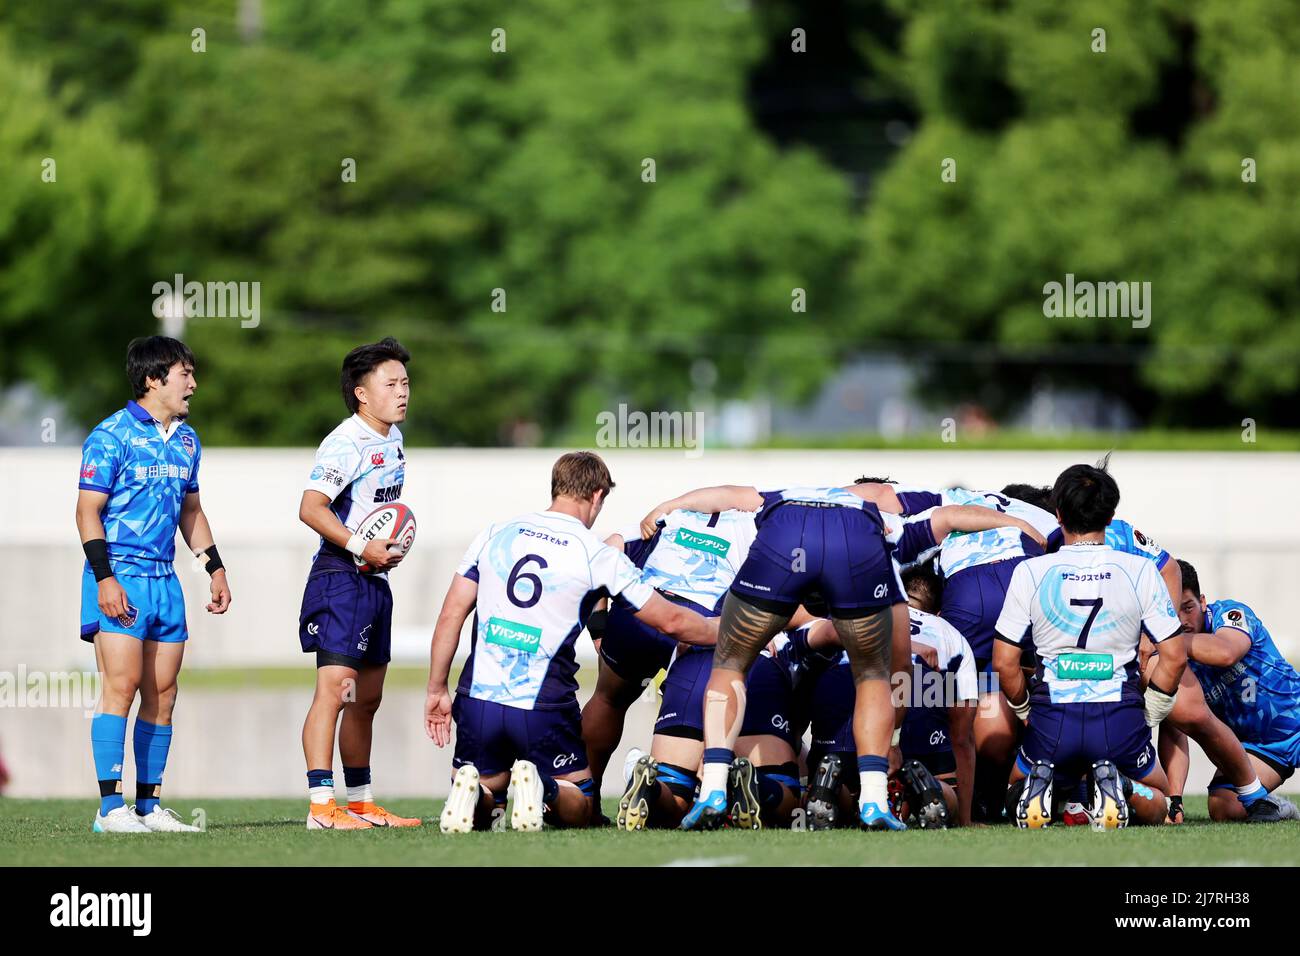 Paloma Mizuho Rugby Stadium, Aichi, Japan. 8th May, 2022. Azuma Doei (), MAY 8, 2022 - Rugby : Japan Rugby League One match between Toyota Industries Shuttles Aichi 55-29 Munakata Sanix Blues at Paloma Mizuho Rugby Stadium, Aichi, Japan. Credit: SportsPressJP/AFLO/Alamy Live News Stock Photo